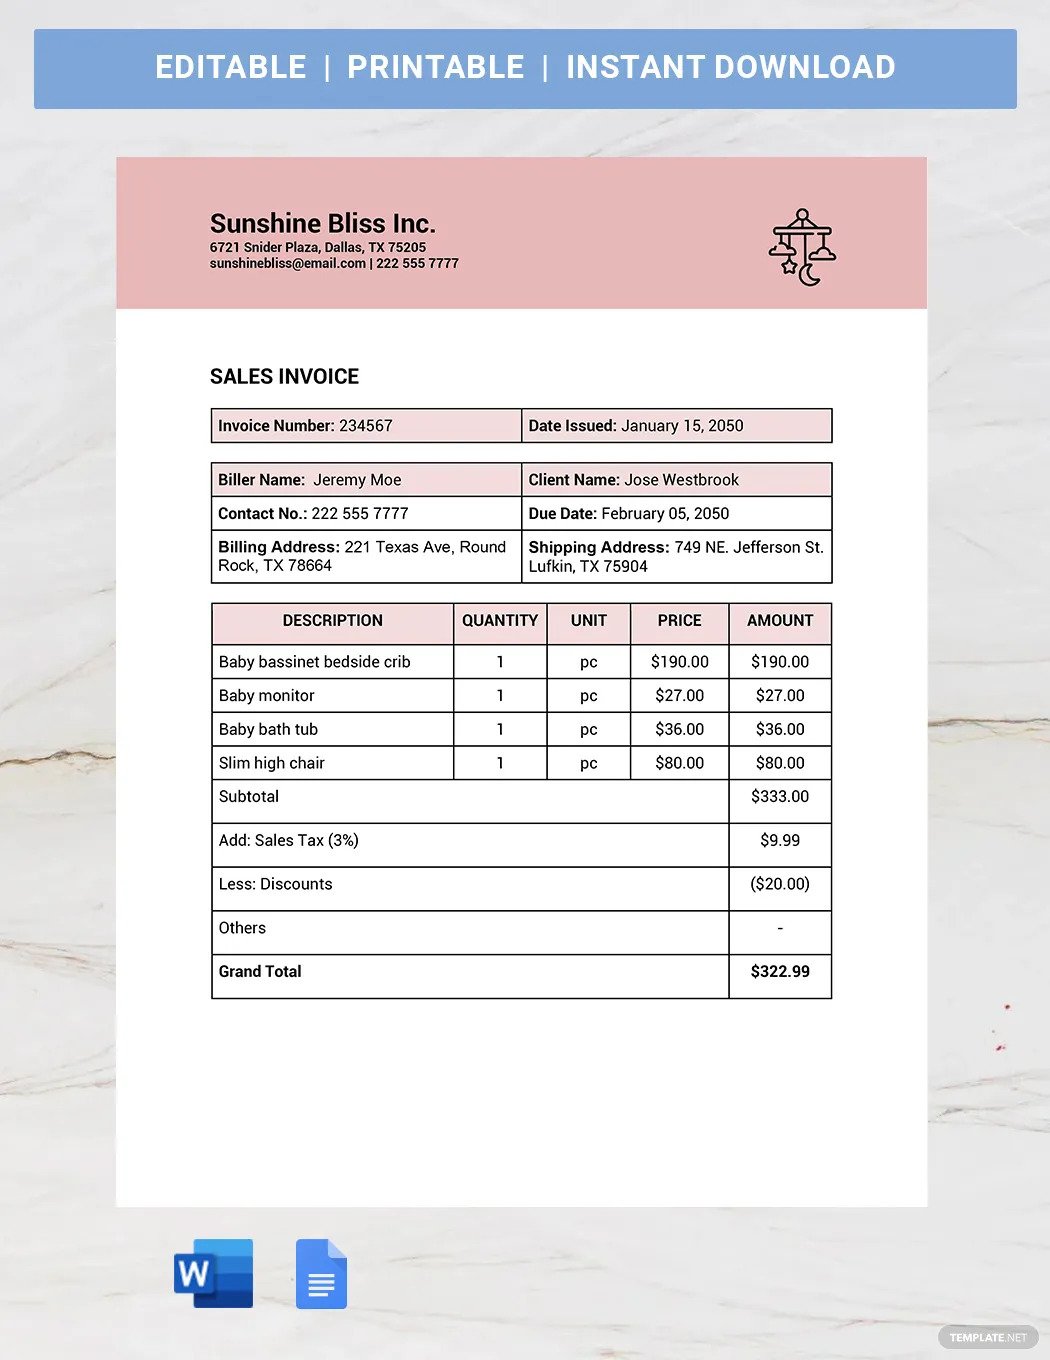 sales invoice book ideas and examples